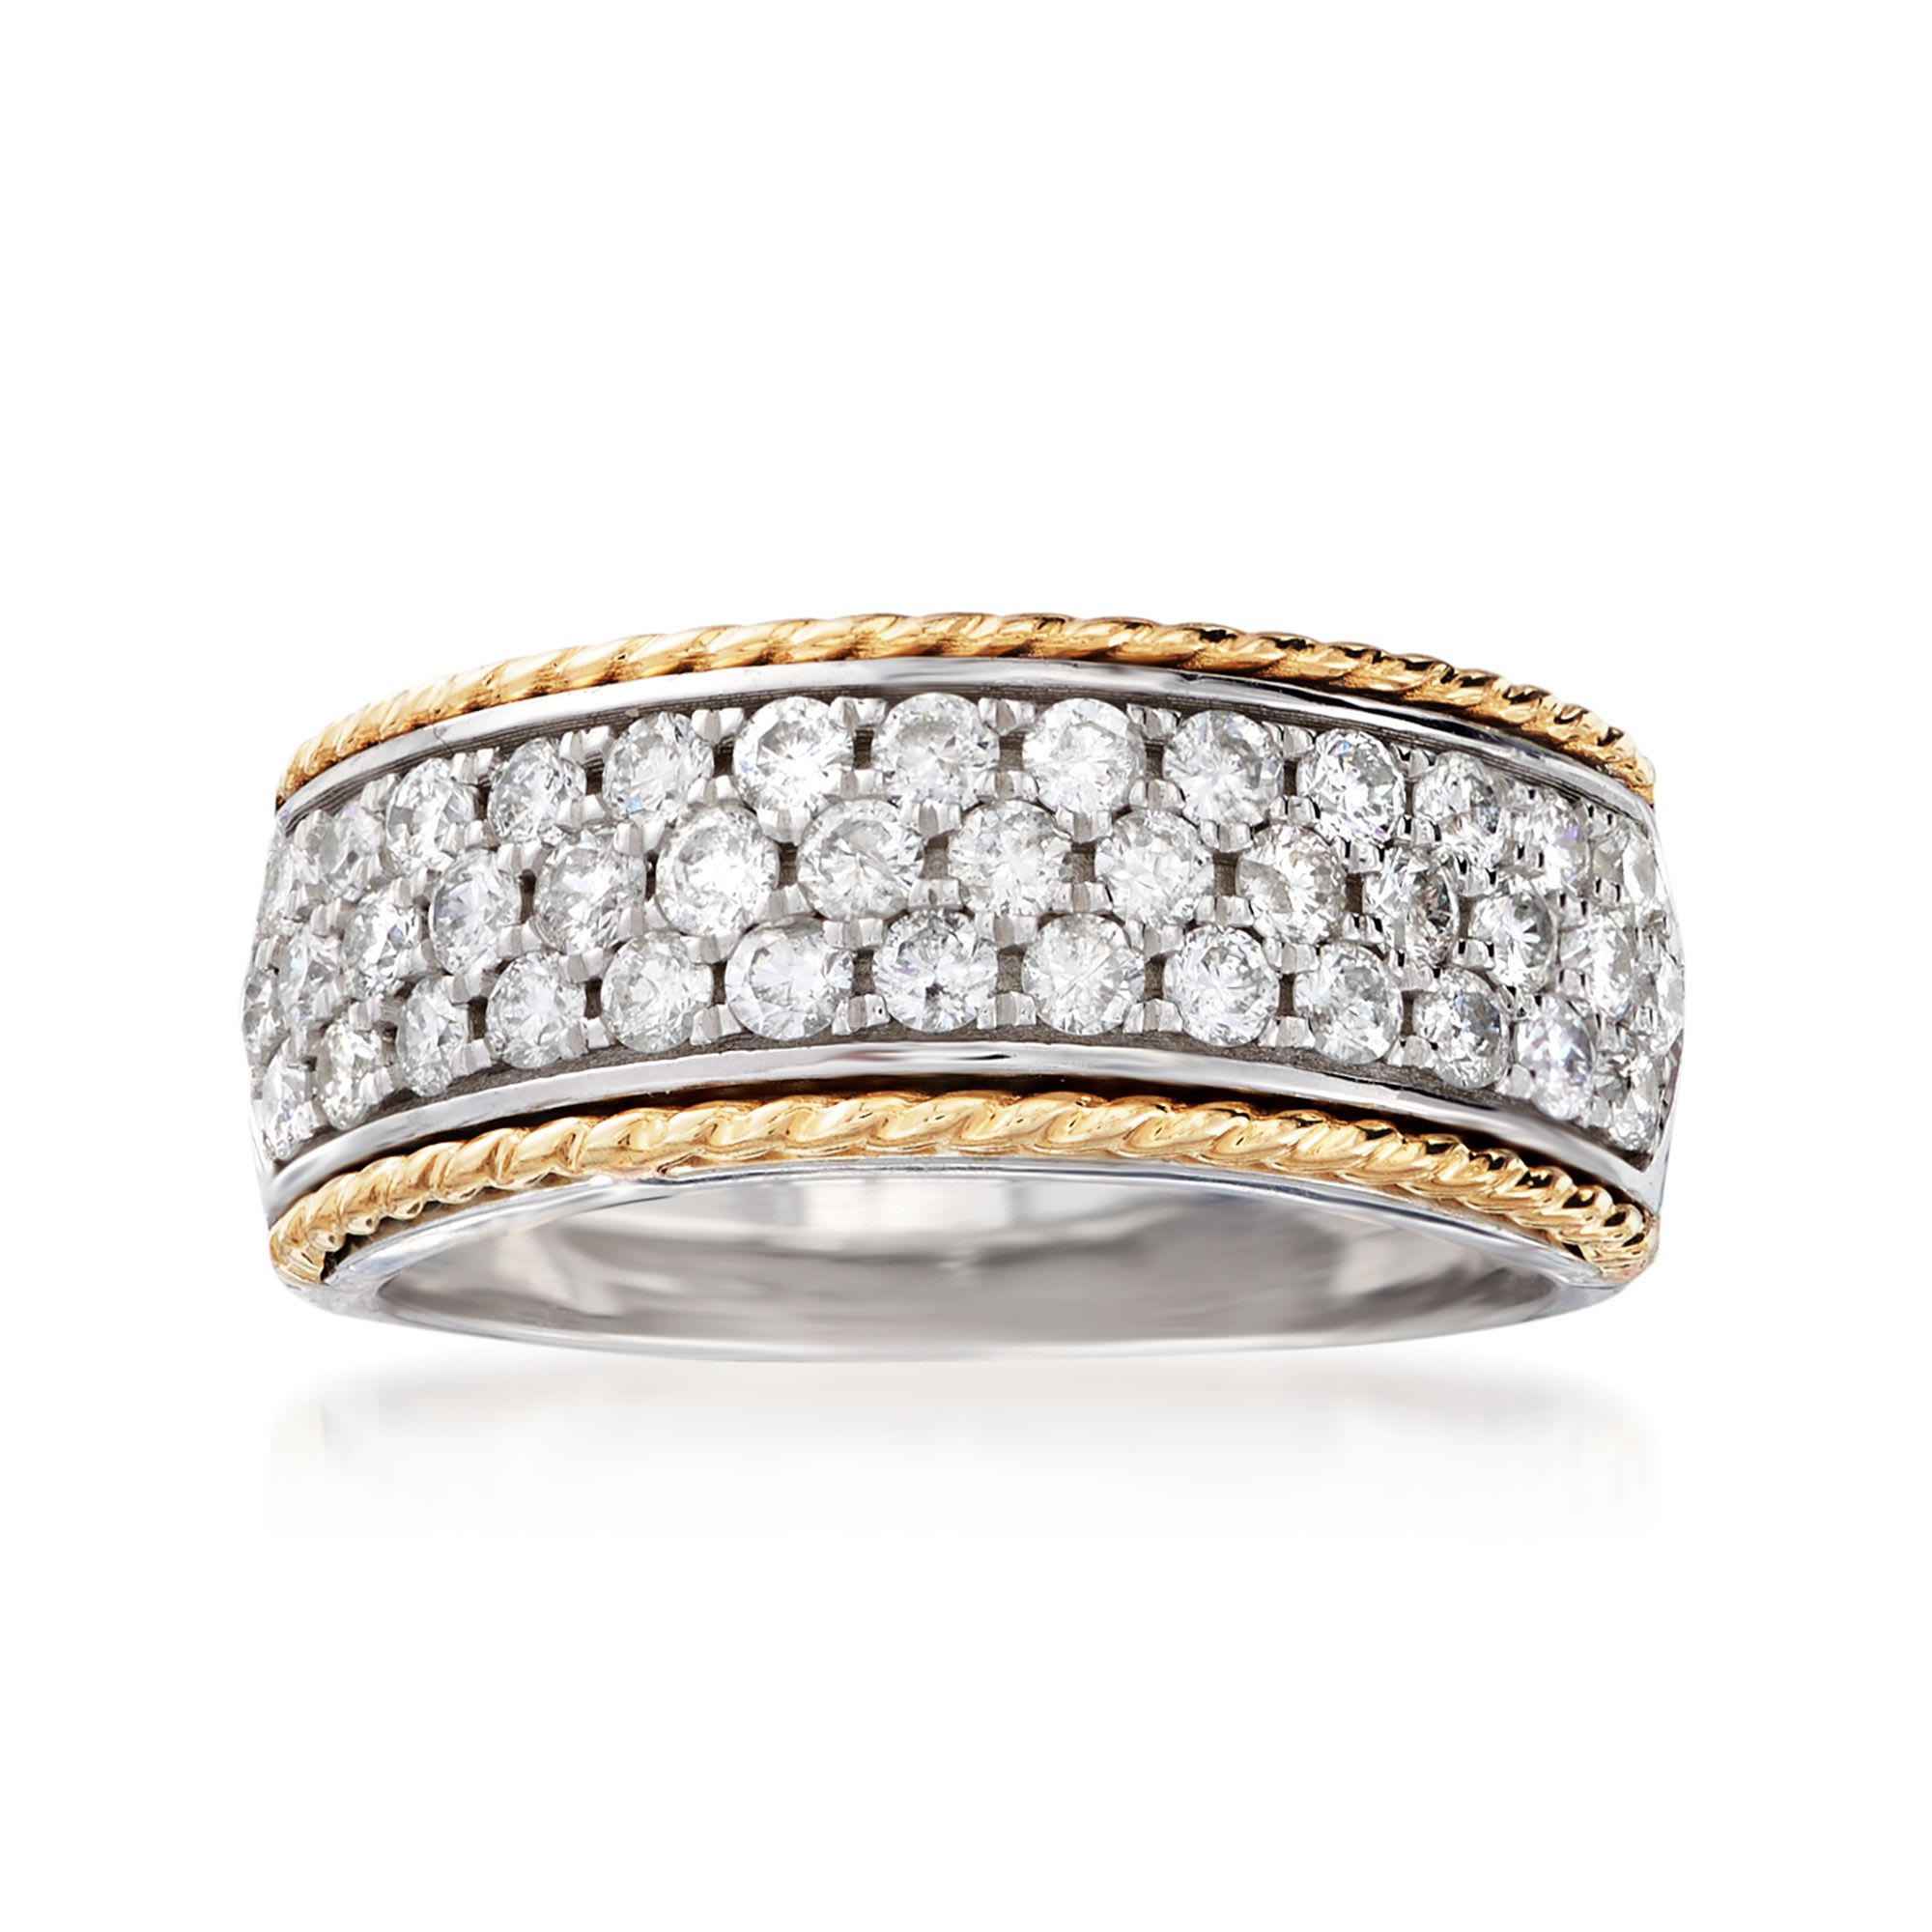 1.00 ct. t.w. Diamond Ring in 14kt Two-Tone Gold | Ross-Simons